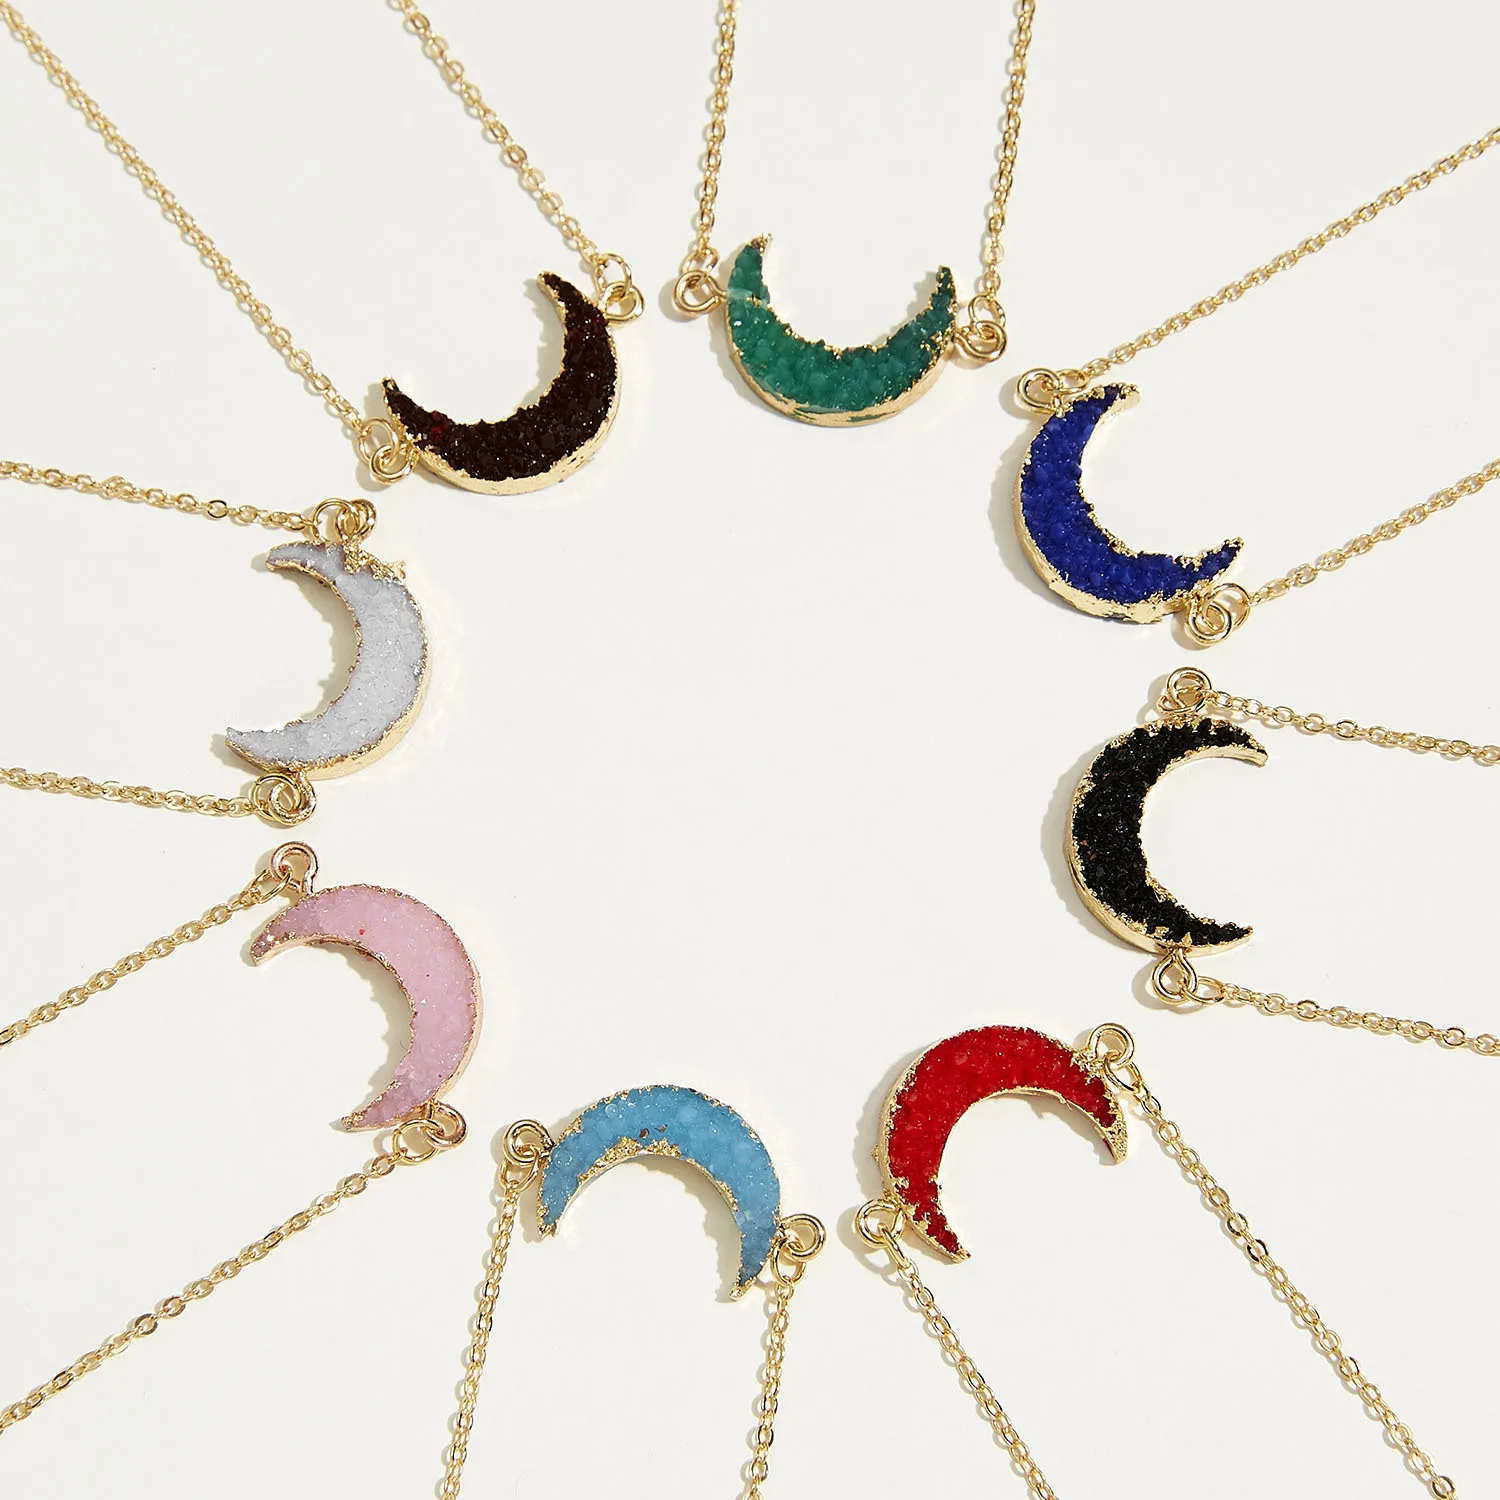 

Wholesale New Fashion Women Wish A Card Necklace Jewelry Gift Colorful Moon Pendant Necklace For Girls, Picture shows